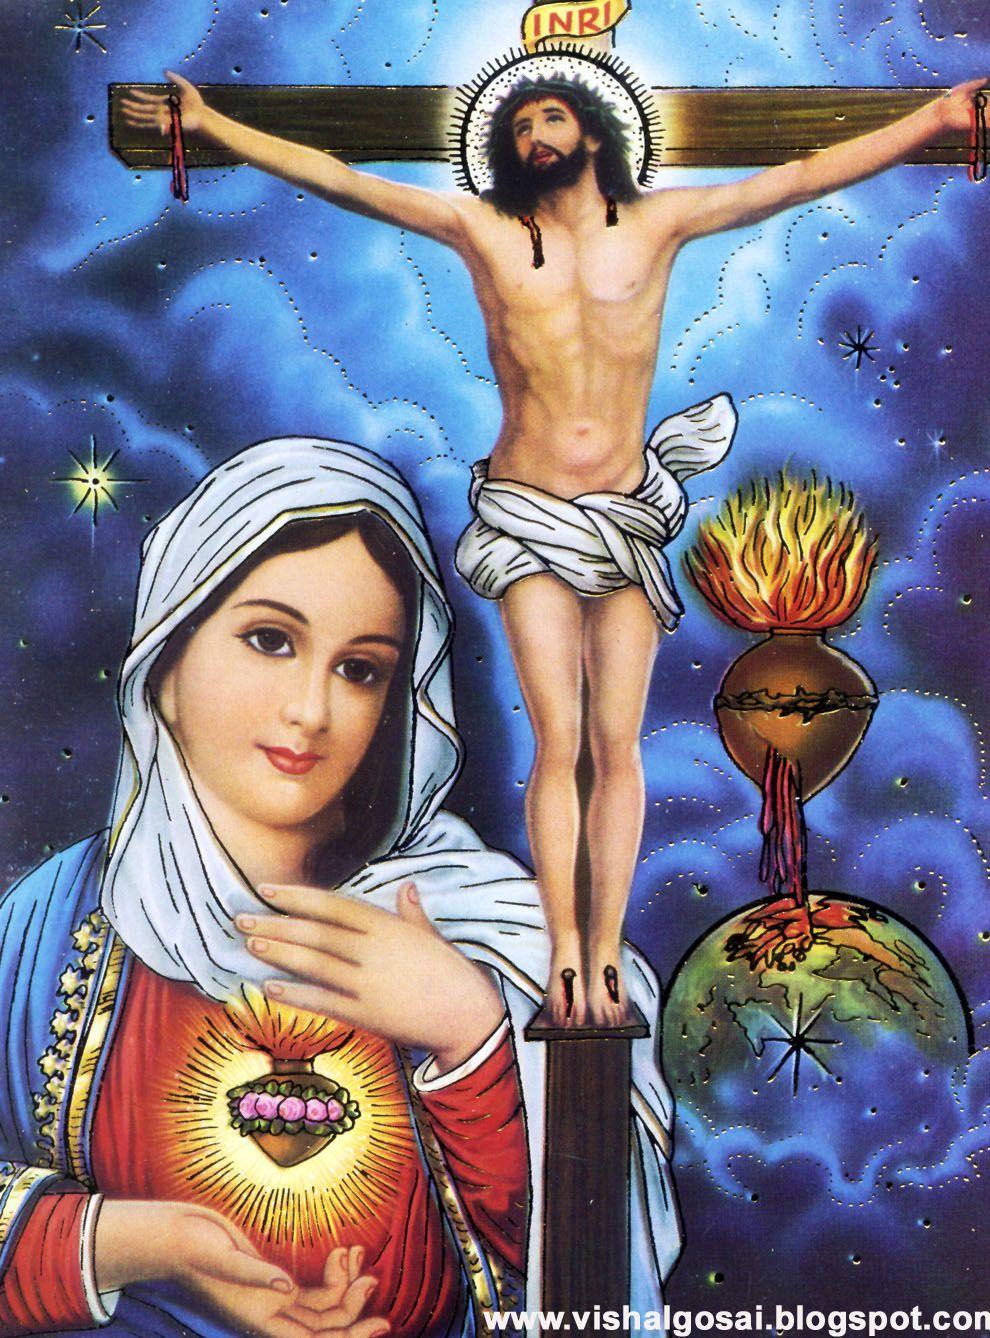 MAR THE MOTHER OF THE HOLLY SON JESUS, MARY IS HELPFULL